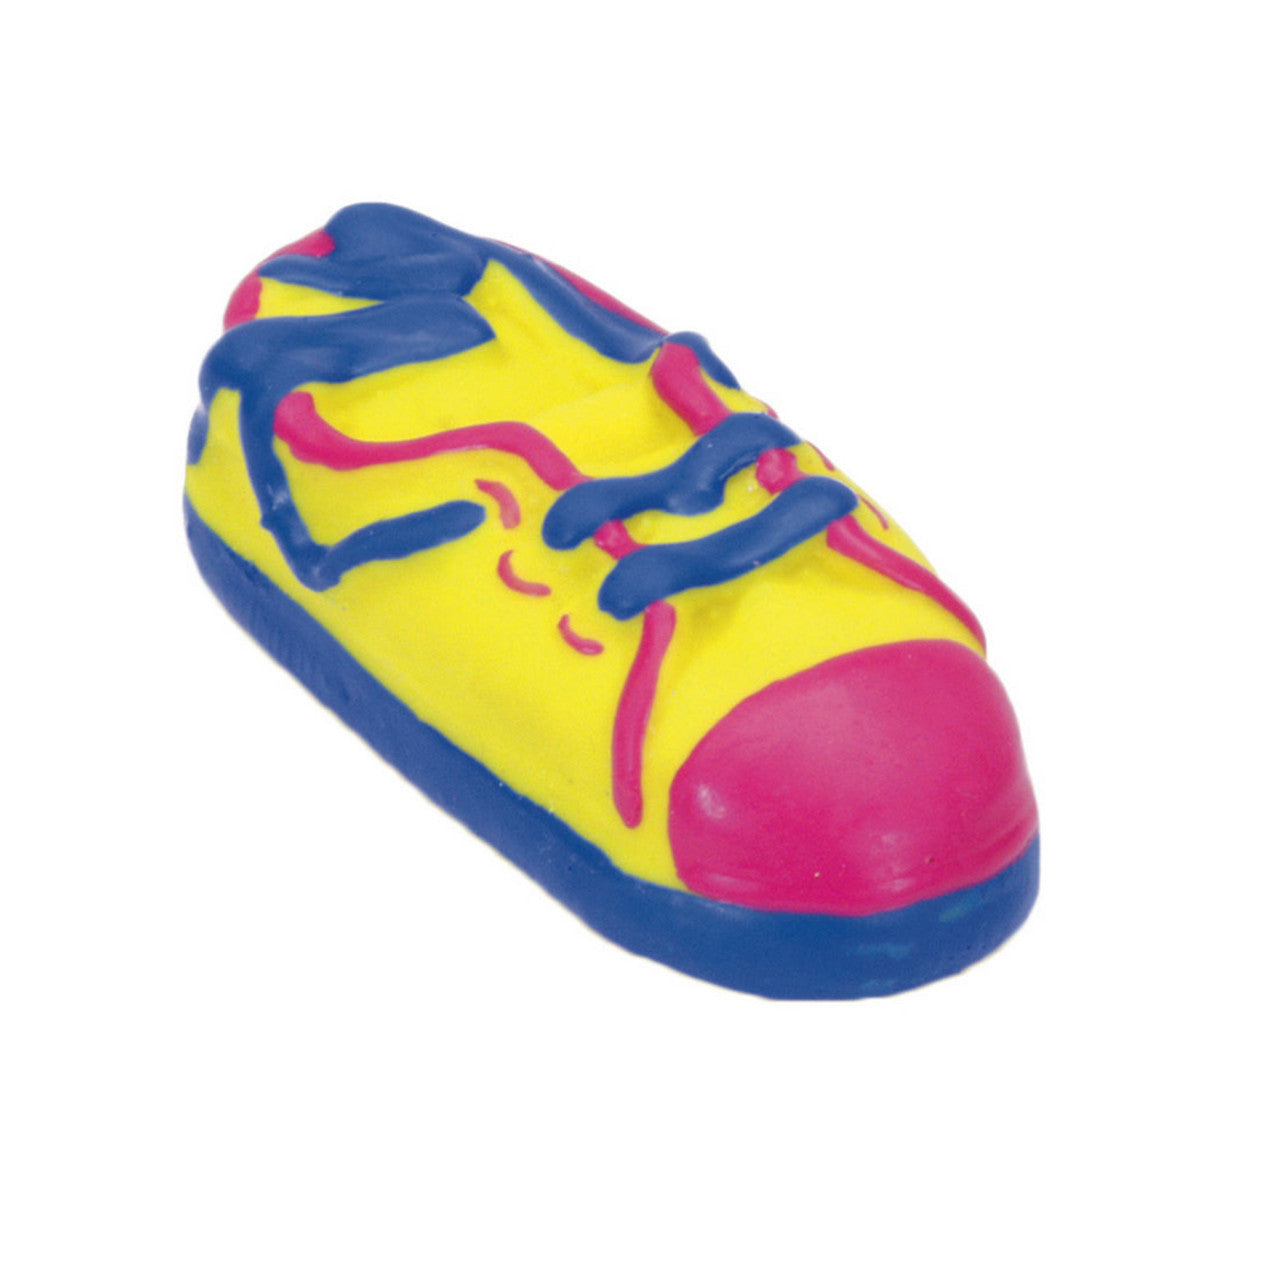 Rascals Latex Dog Toy Tennis Shoe Multi-Color 3.5 in